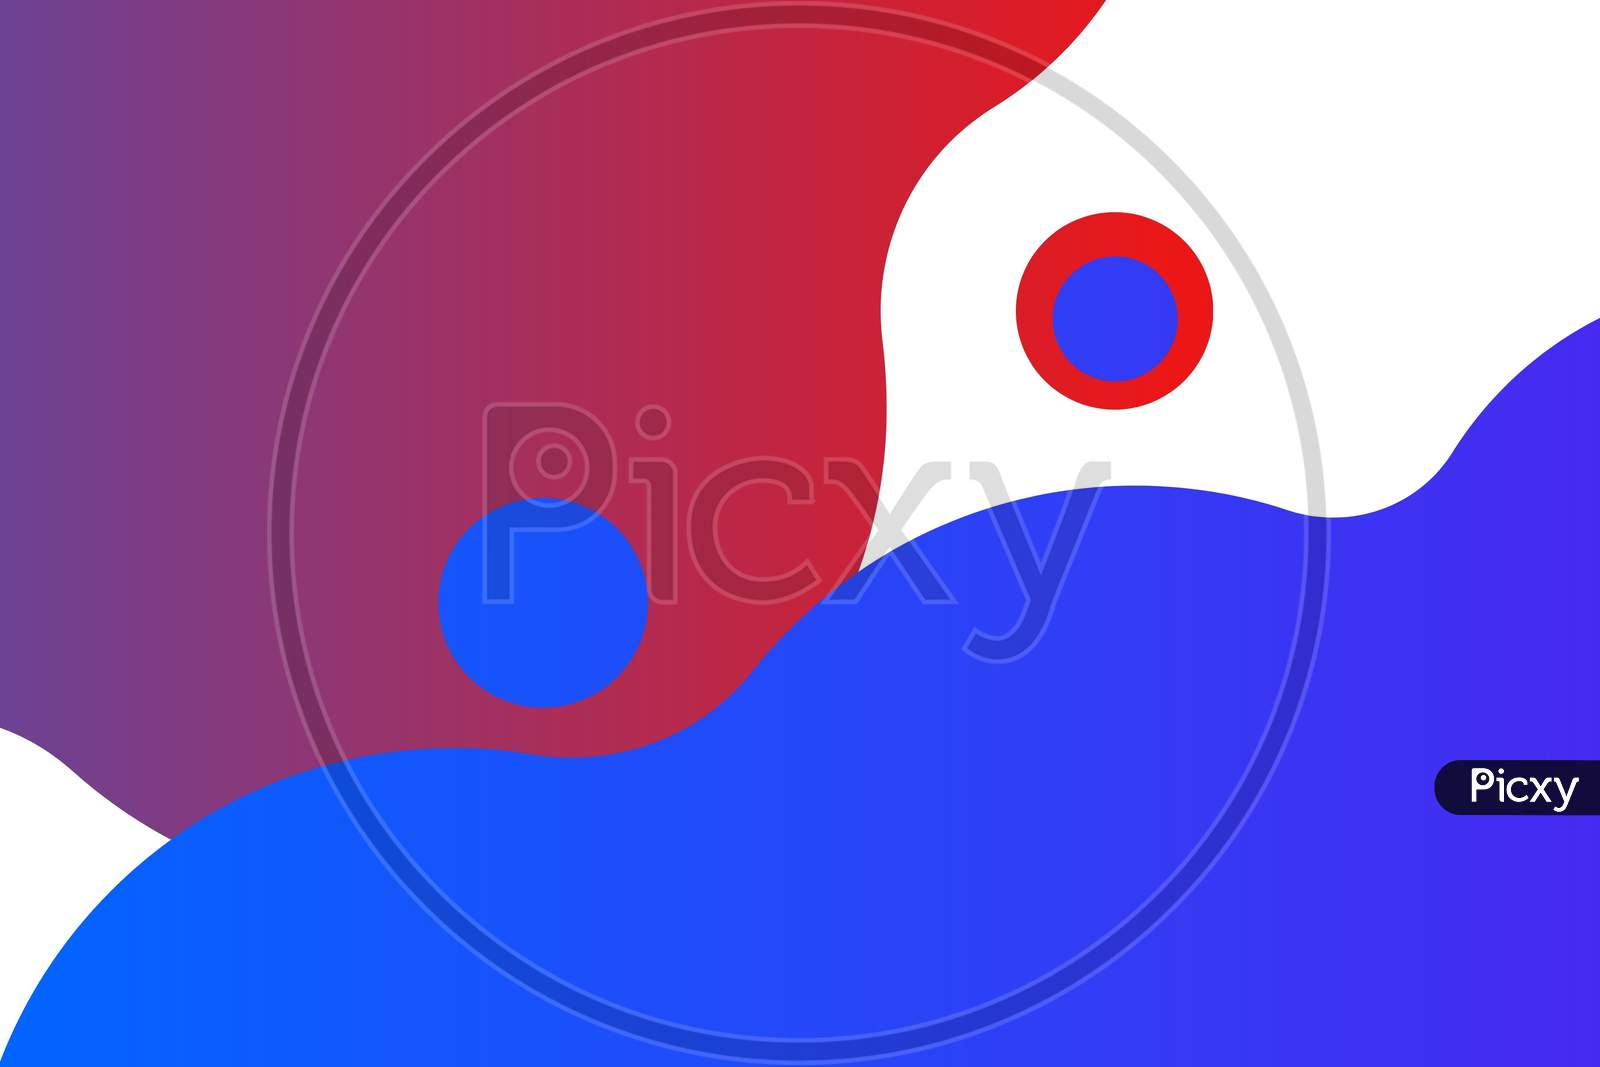 Red And Blue Abstract Or Illustration For Video Background